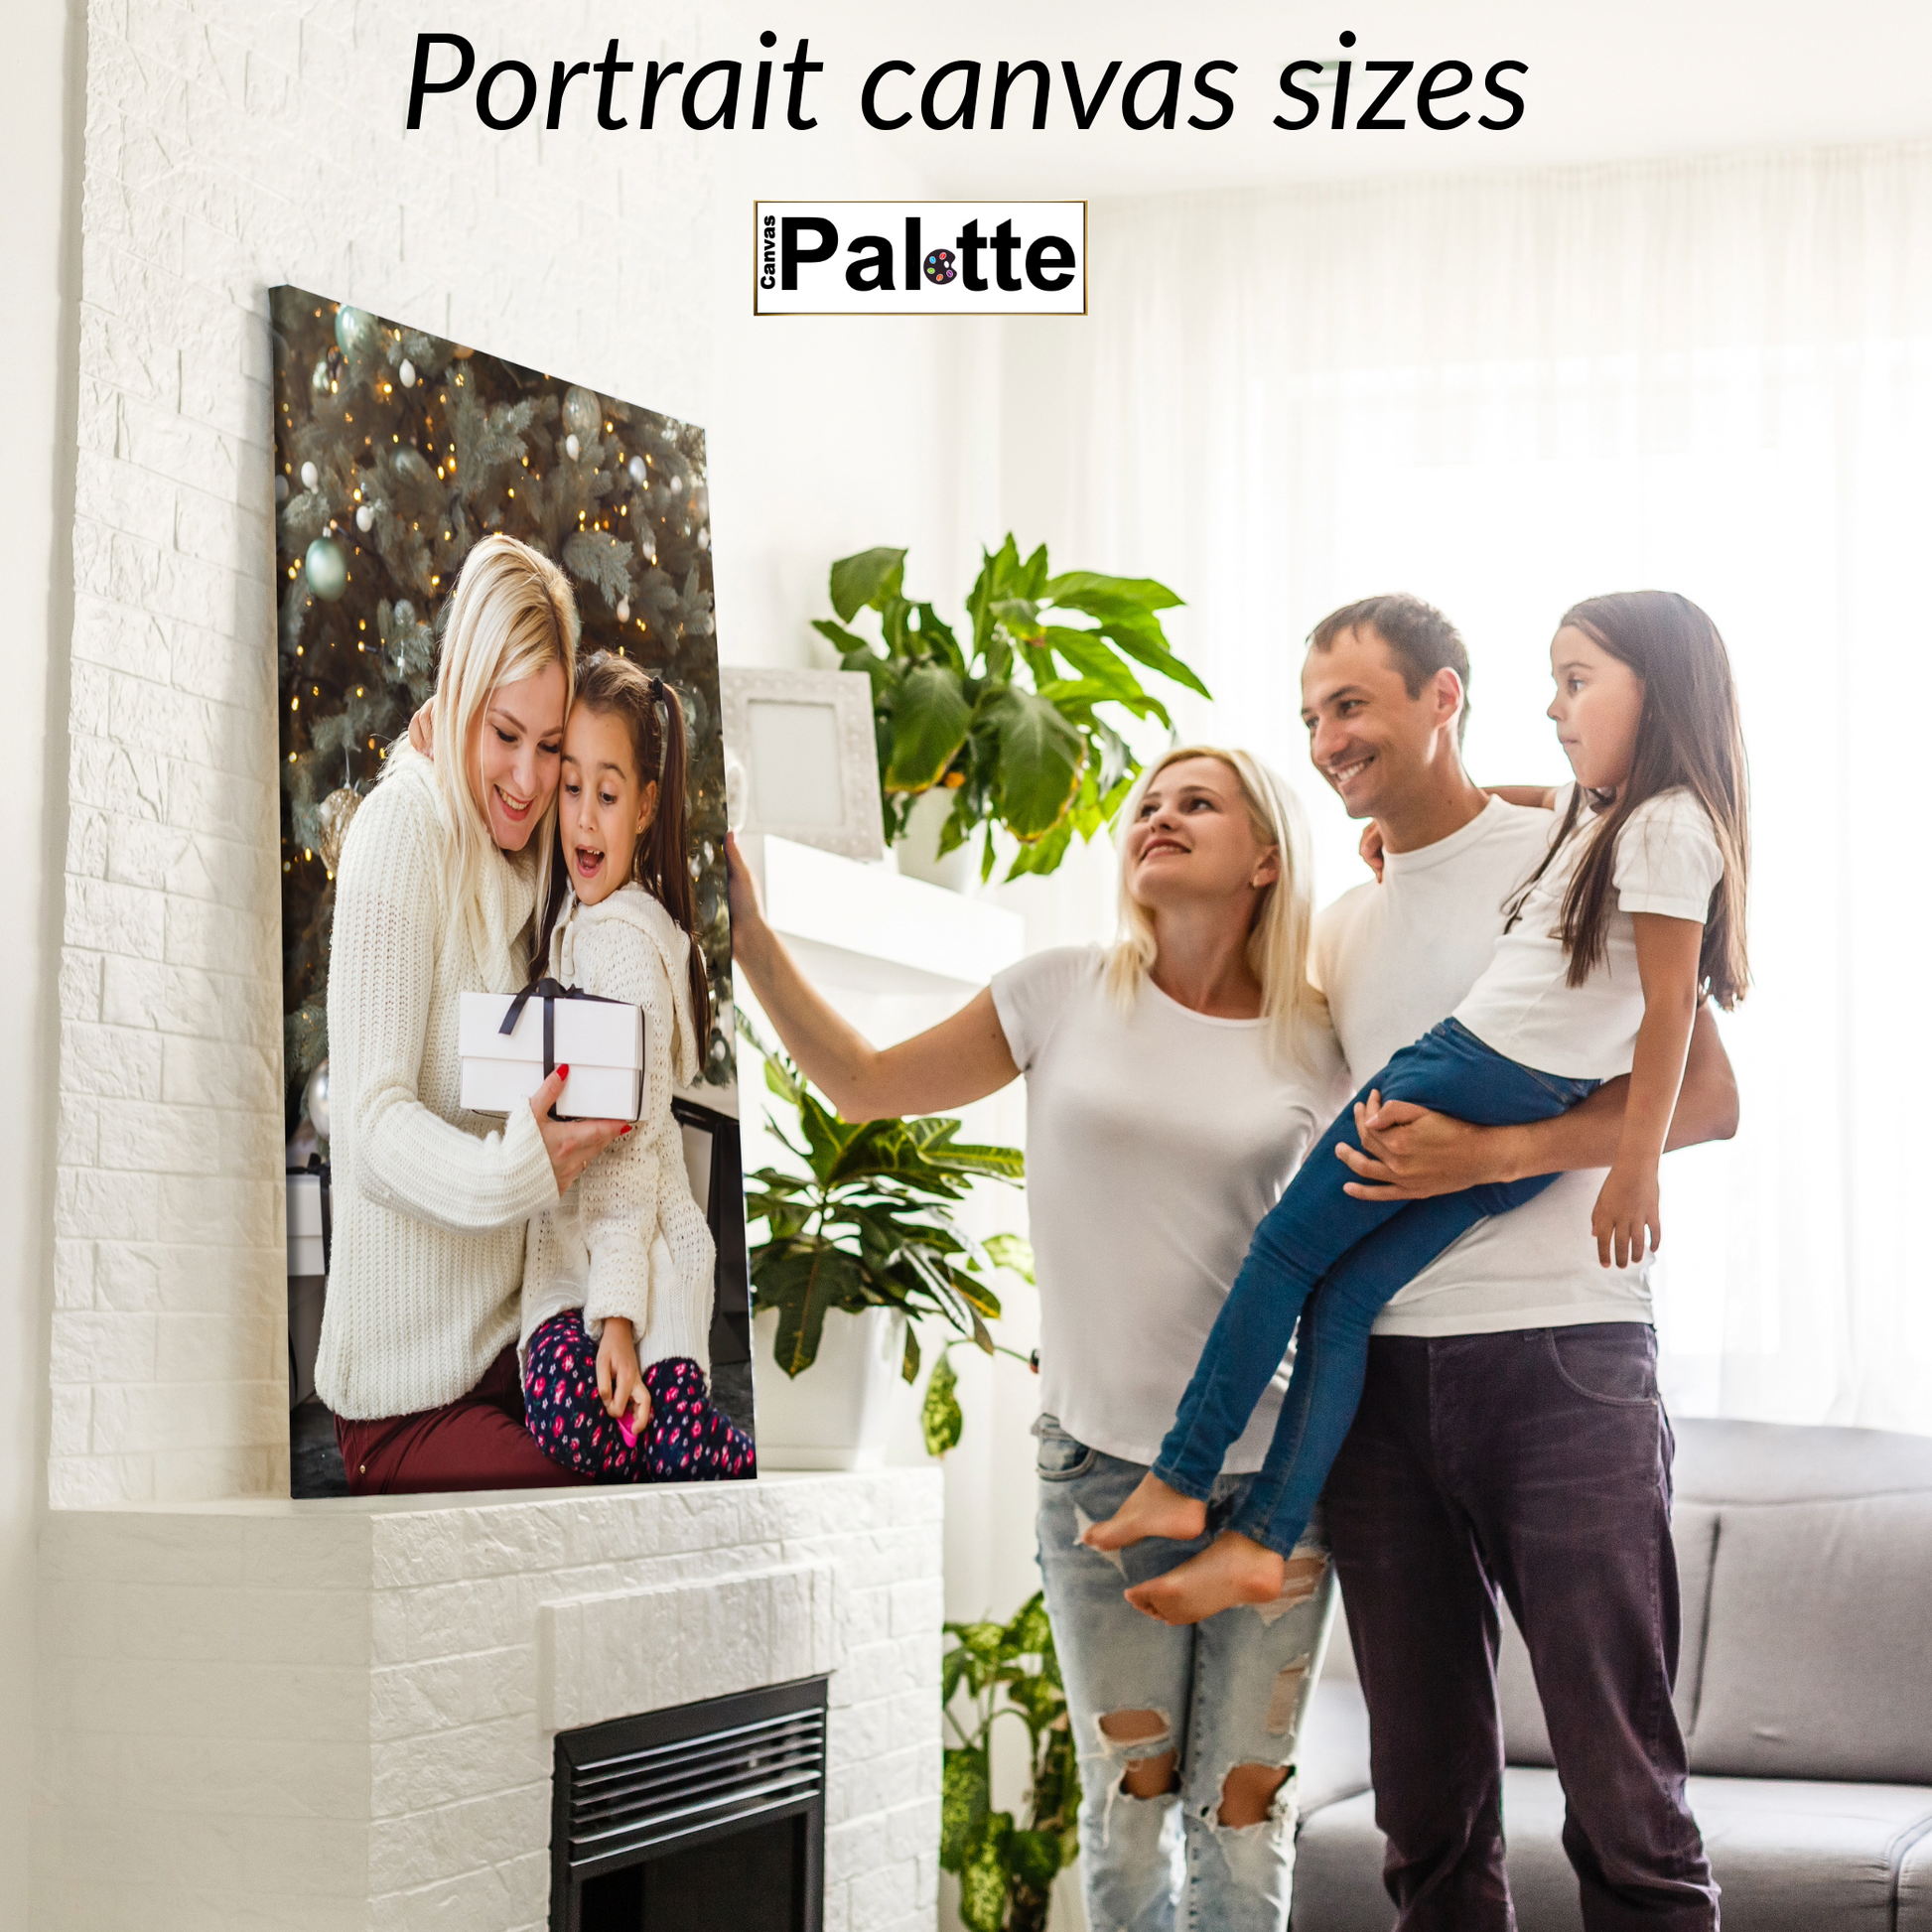 Sample of custom portrait prints on canvas Canada on CanvasPalette.com.  Photo shows a happy family in the living room, mum, dad and daughter admiring a large portrait of mum and daughter exchanging gifts canvas prints at Canvas.com 